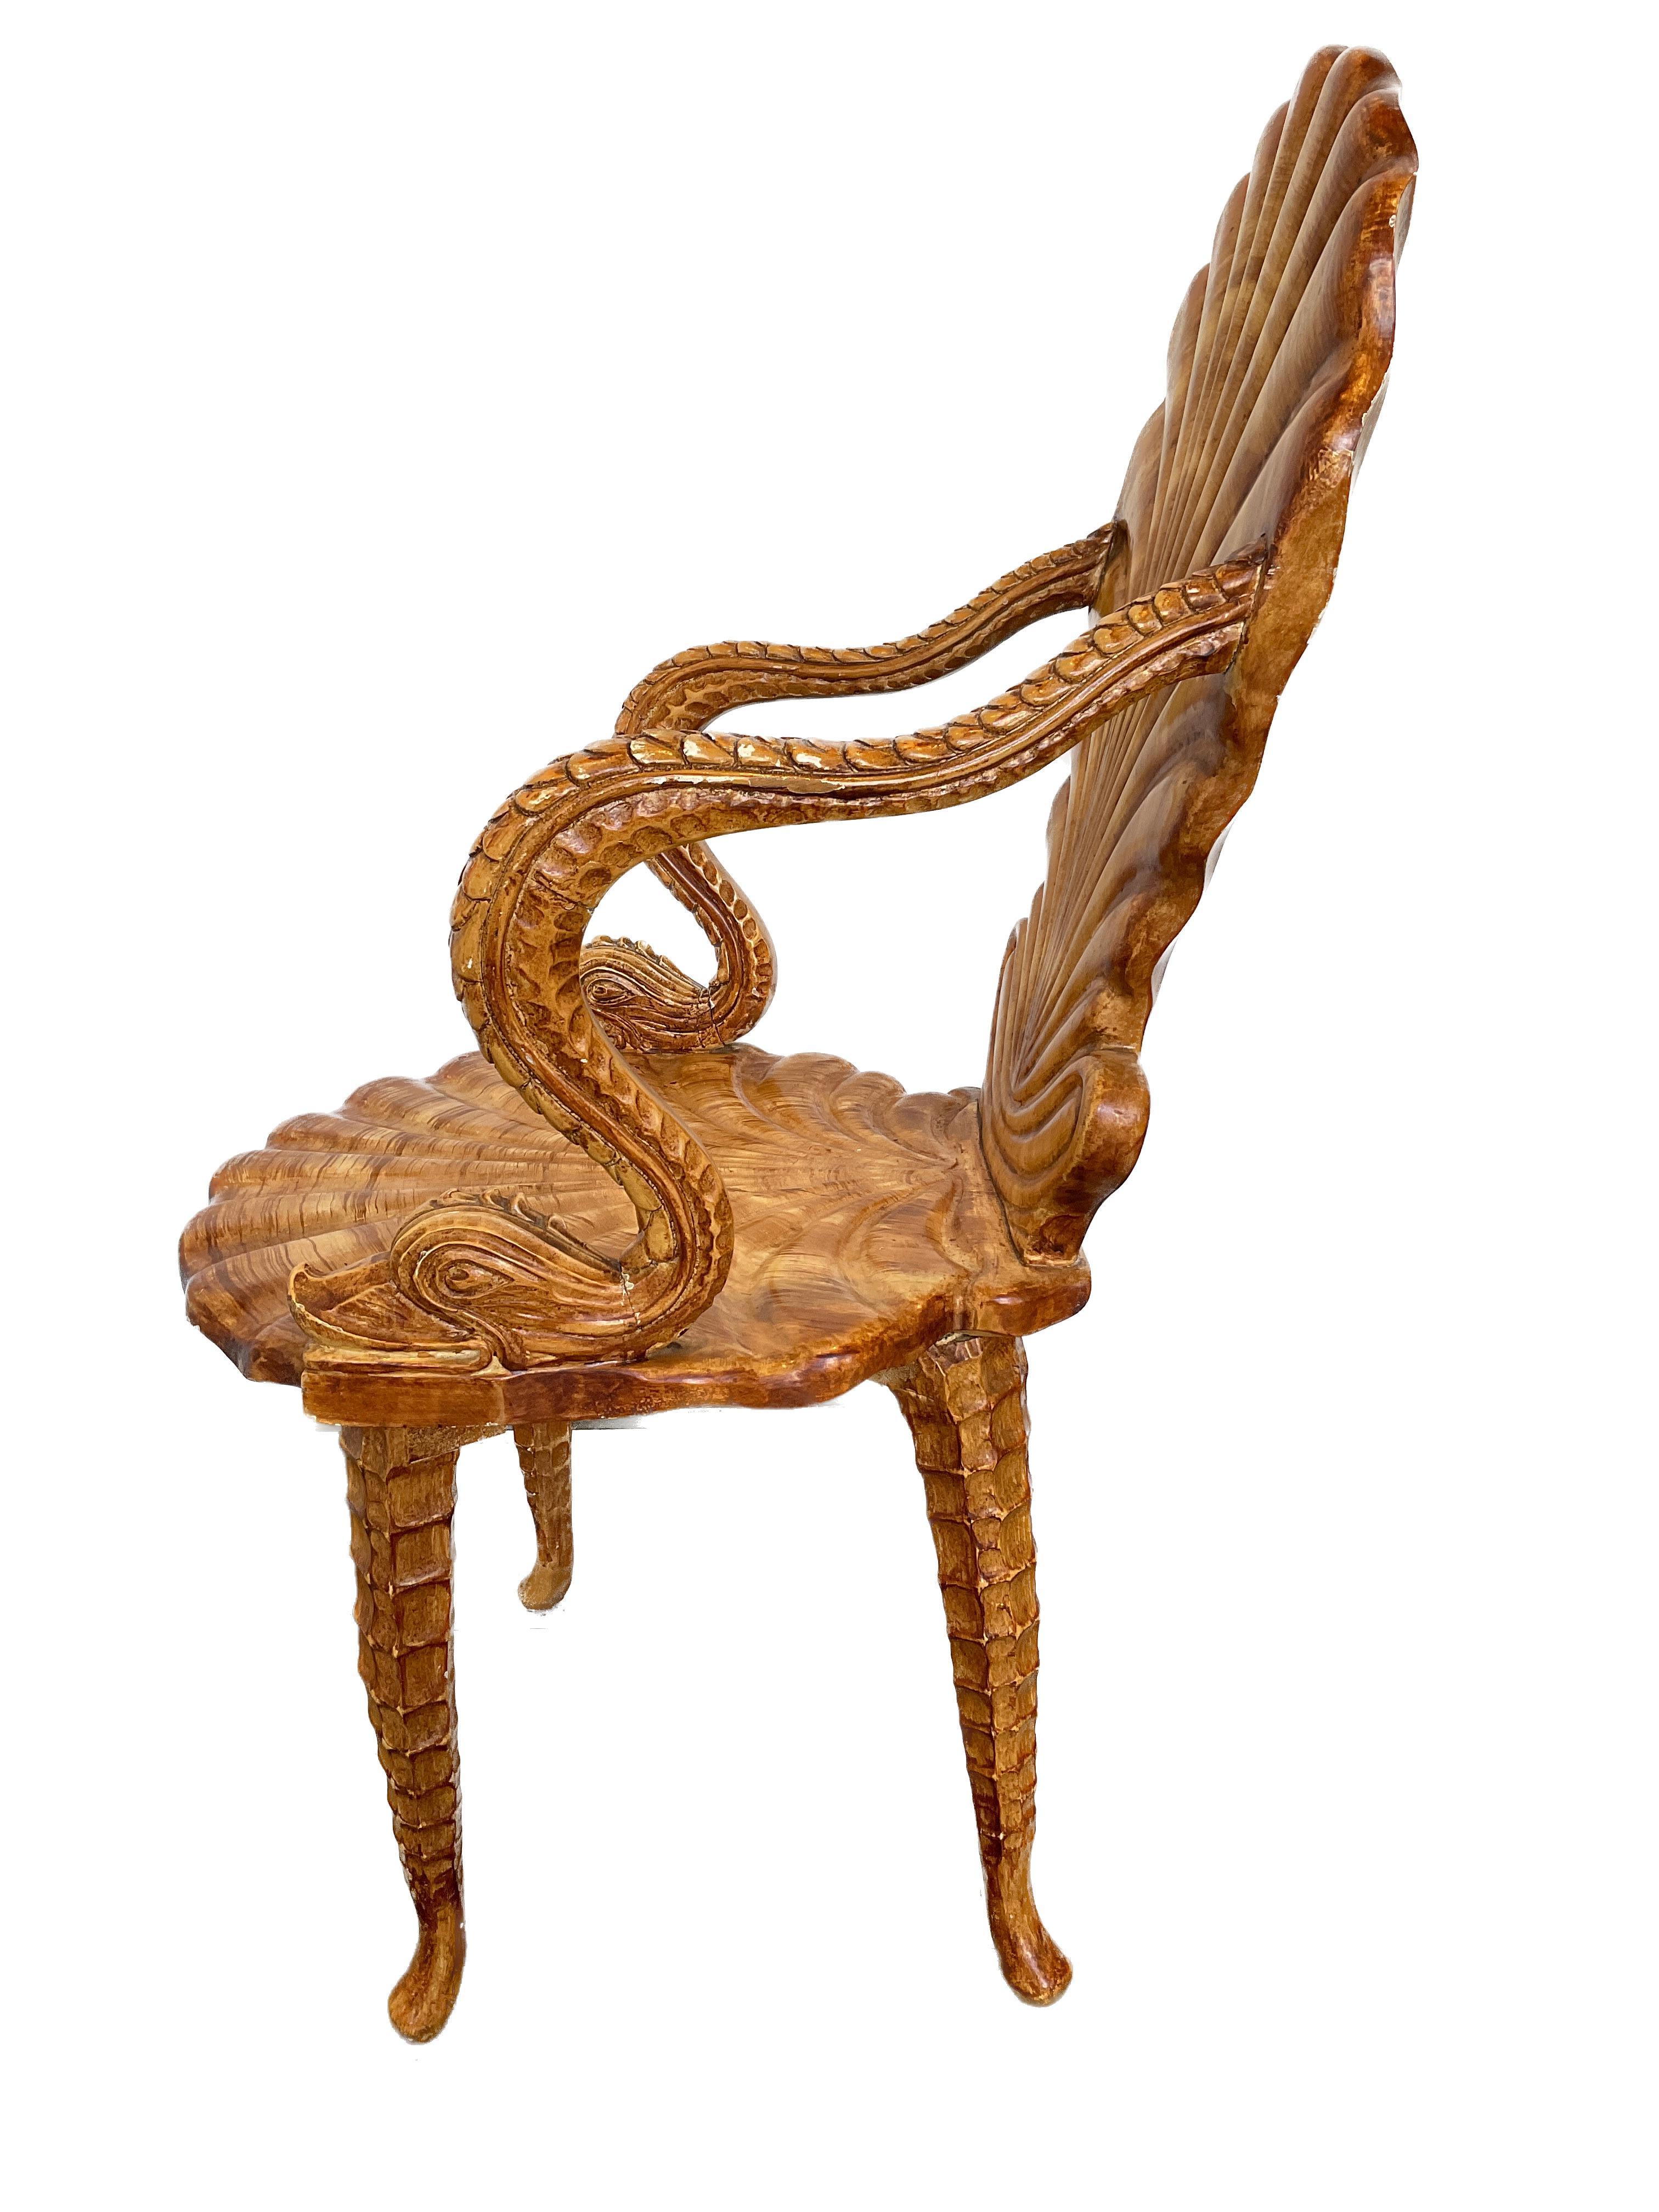 1960s Carved Wood Italian Fantasy Chair For Sale at 1stDibs